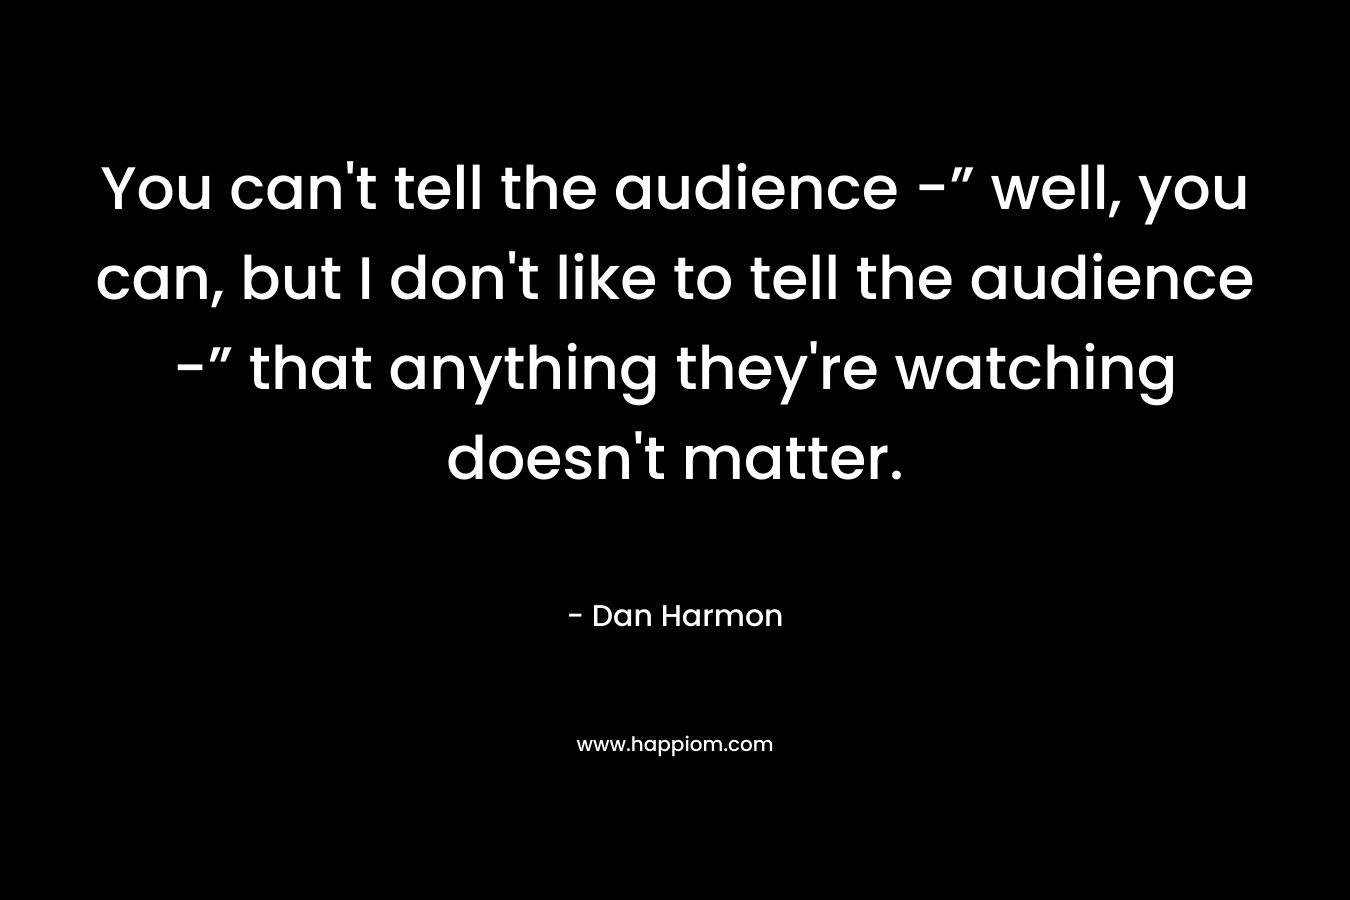 You can’t tell the audience -” well, you can, but I don’t like to tell the audience -” that anything they’re watching doesn’t matter. – Dan  Harmon